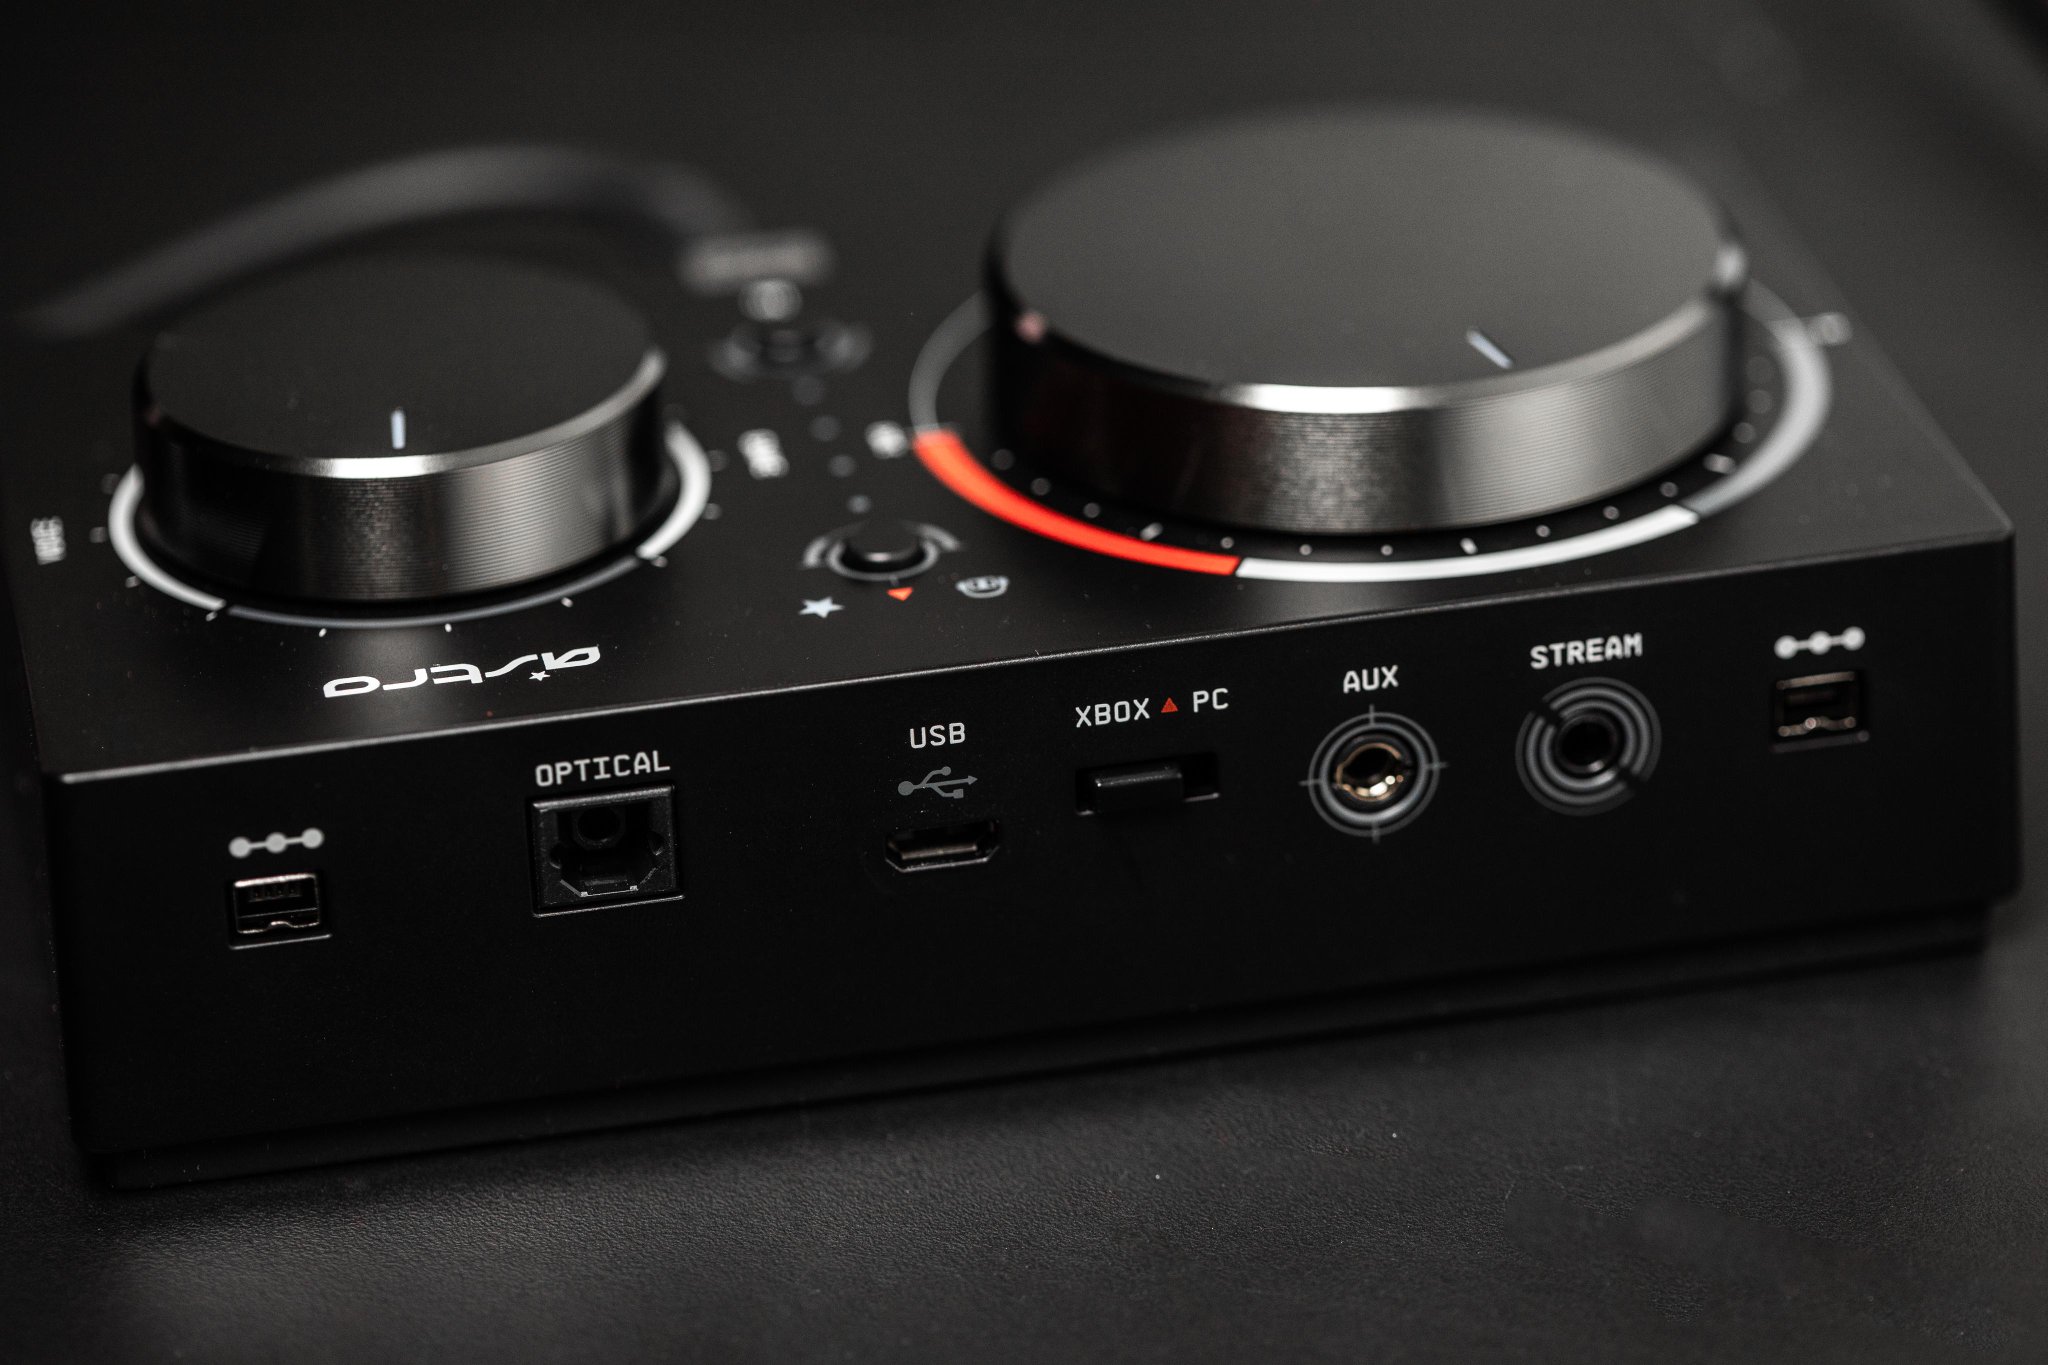 ASTRO Gaming on Twitter: "Pro tip: You can connect your MixAmp with your  console and PC at the same time using the MixAmp's 3.5mm Aux port for the  secondary connection to your